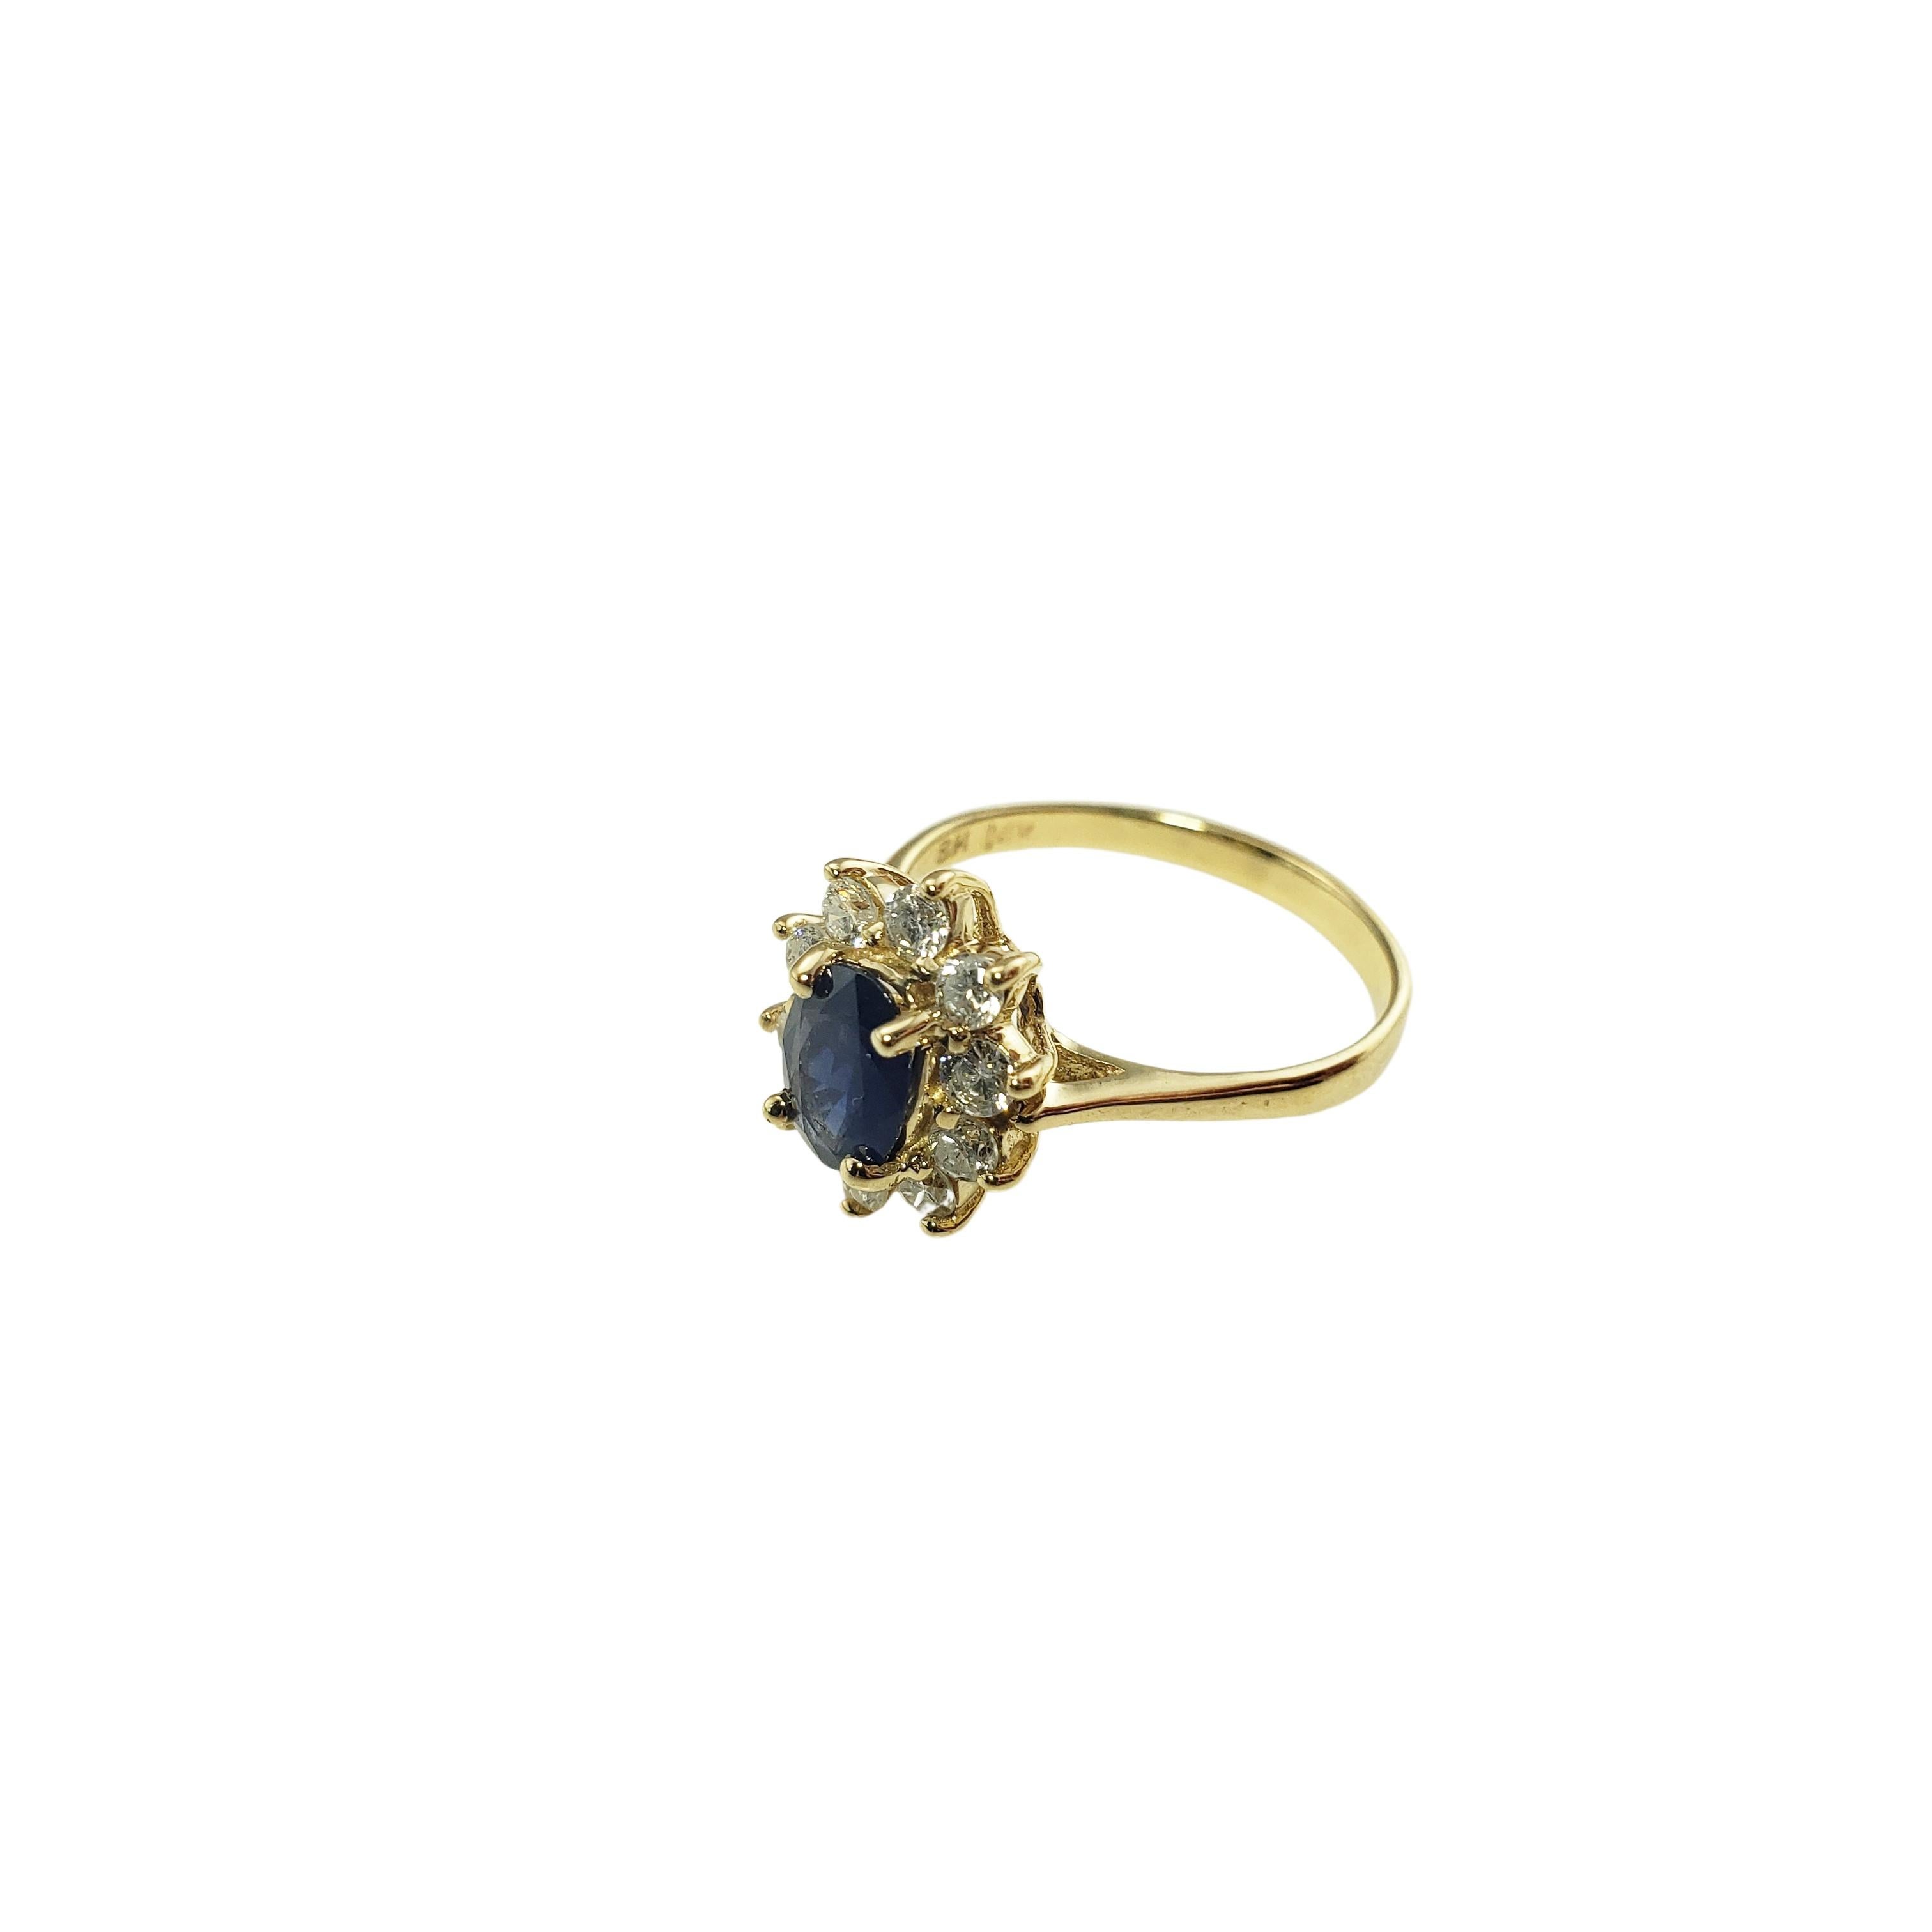 Women's 14 Karat Yellow Gold Natural Sapphire and Diamond Ring Size 5.75 #17068 For Sale